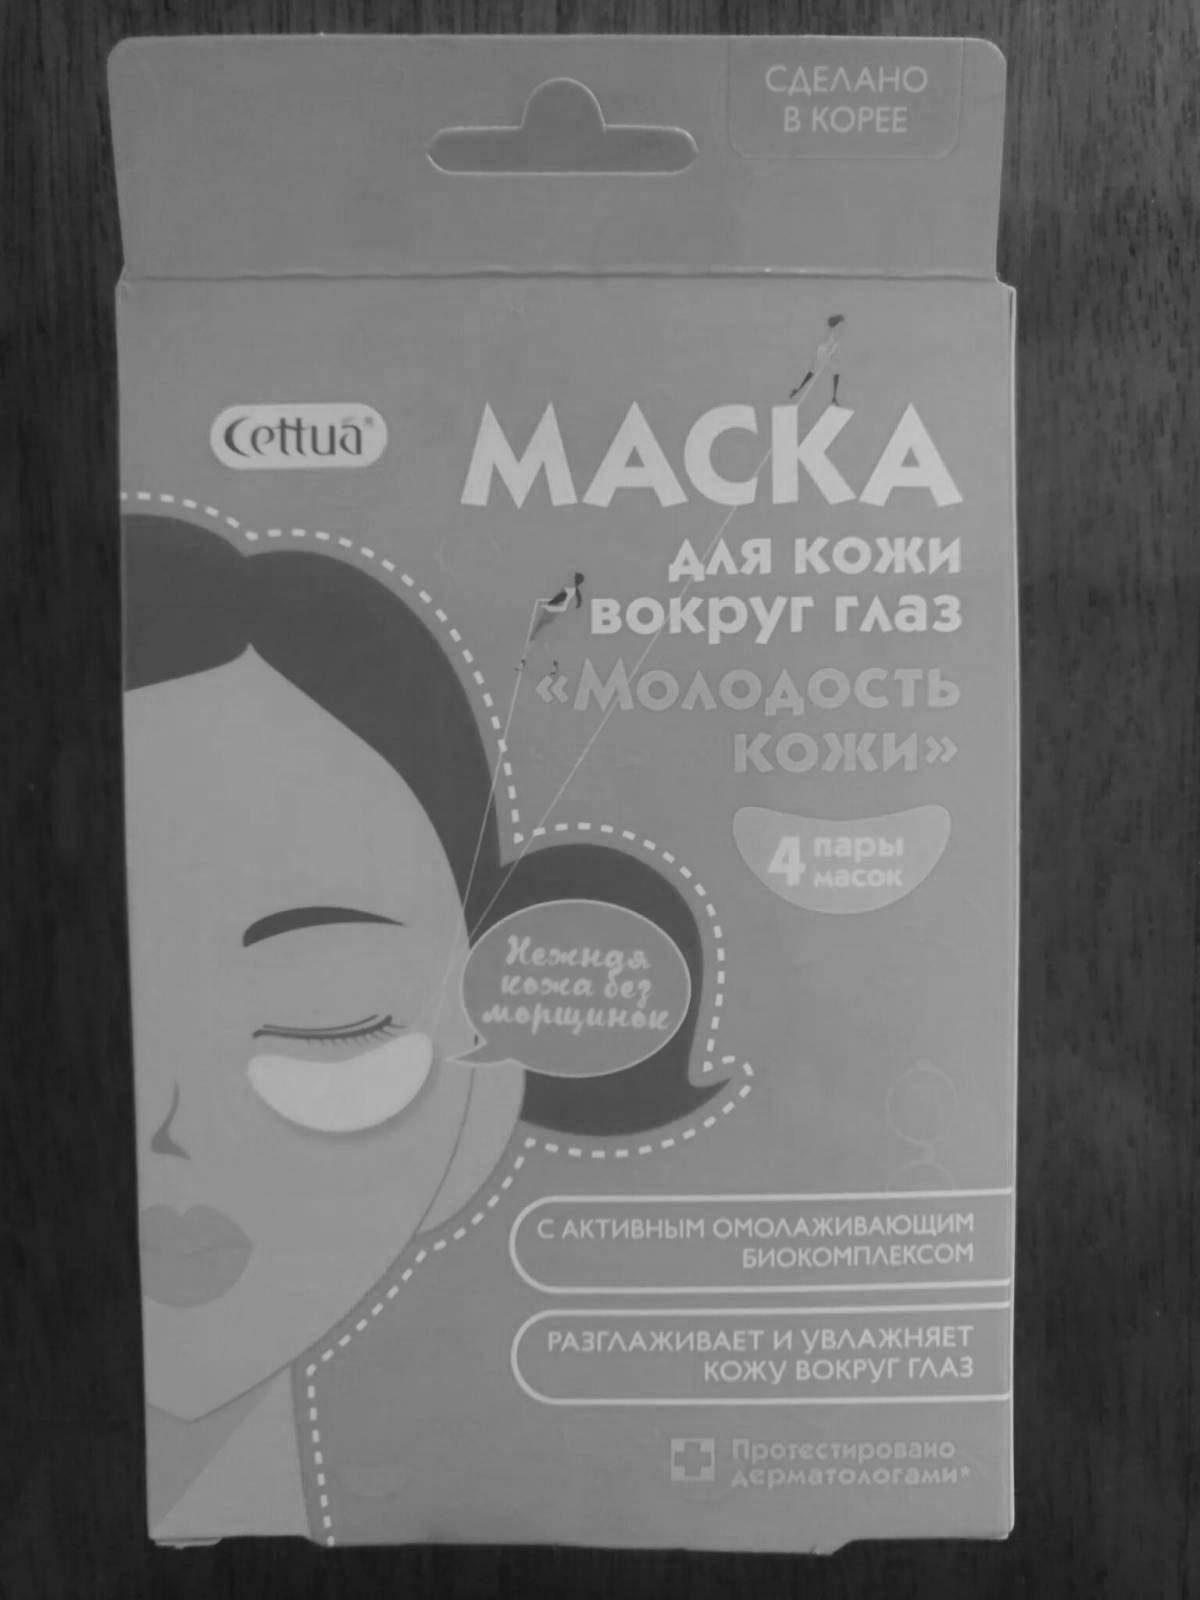 Attractive moisturizing face masks coloring book